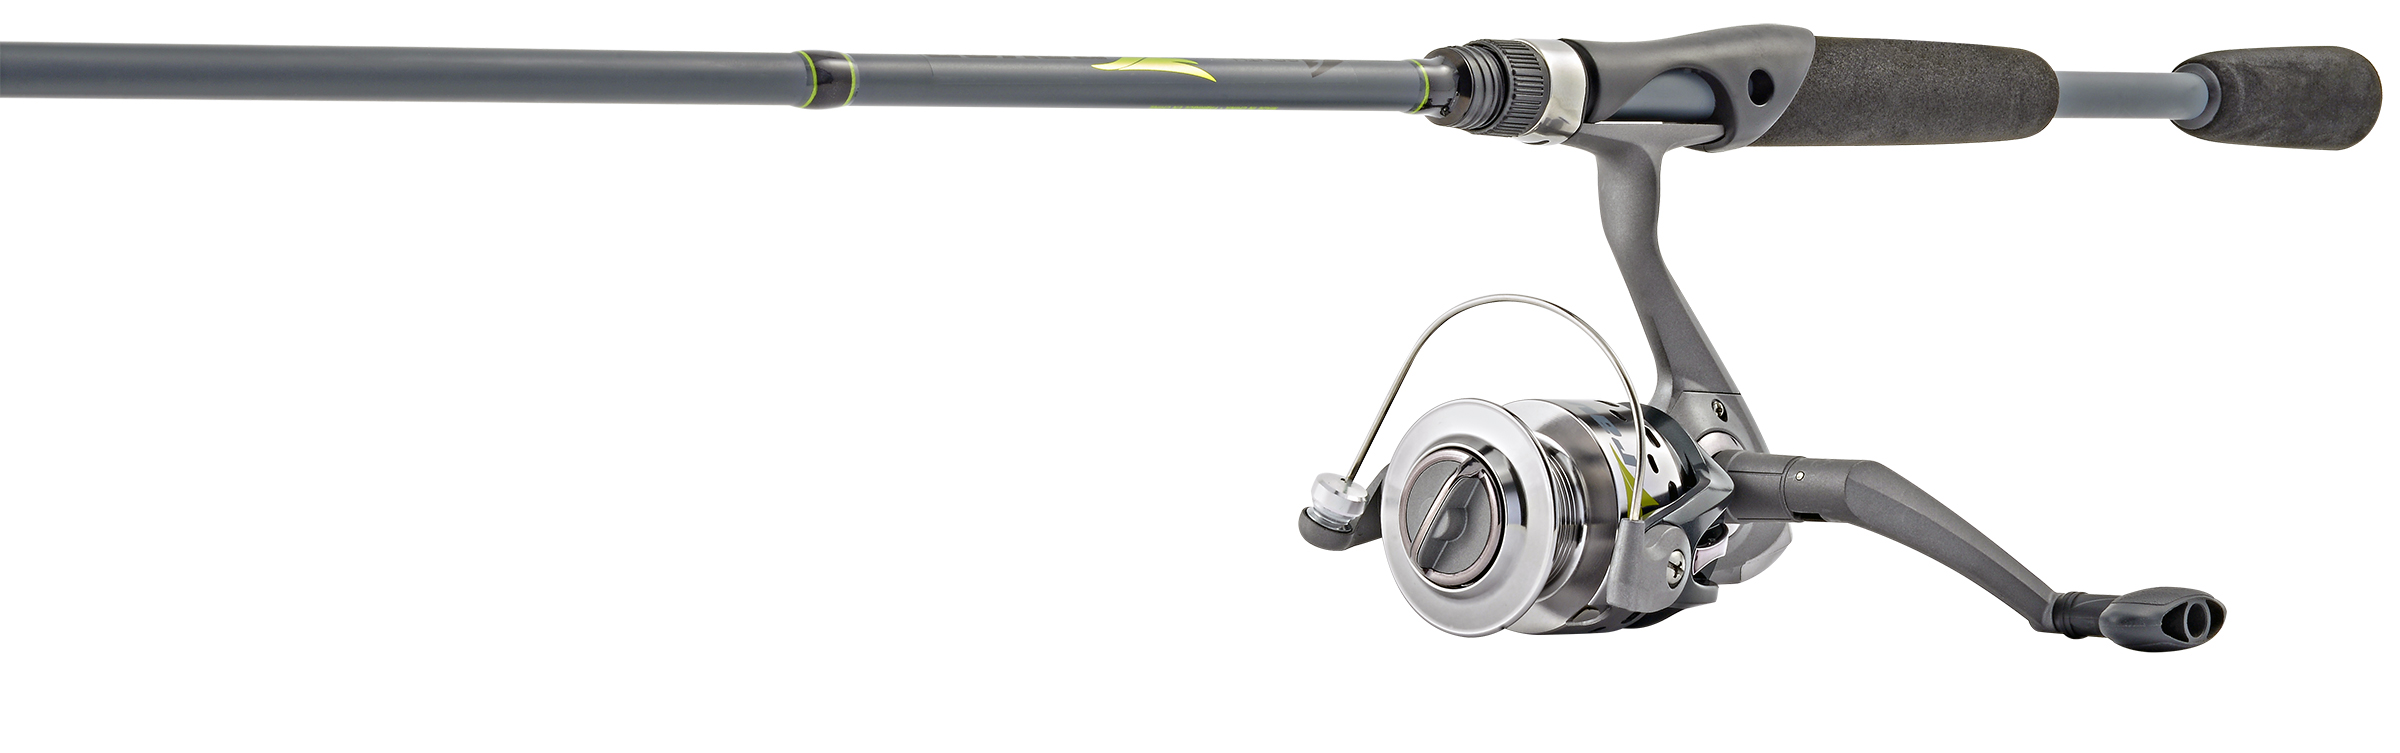 South Bend Raven Spinning Rod and Reel Combo , Up to $1.50 Off